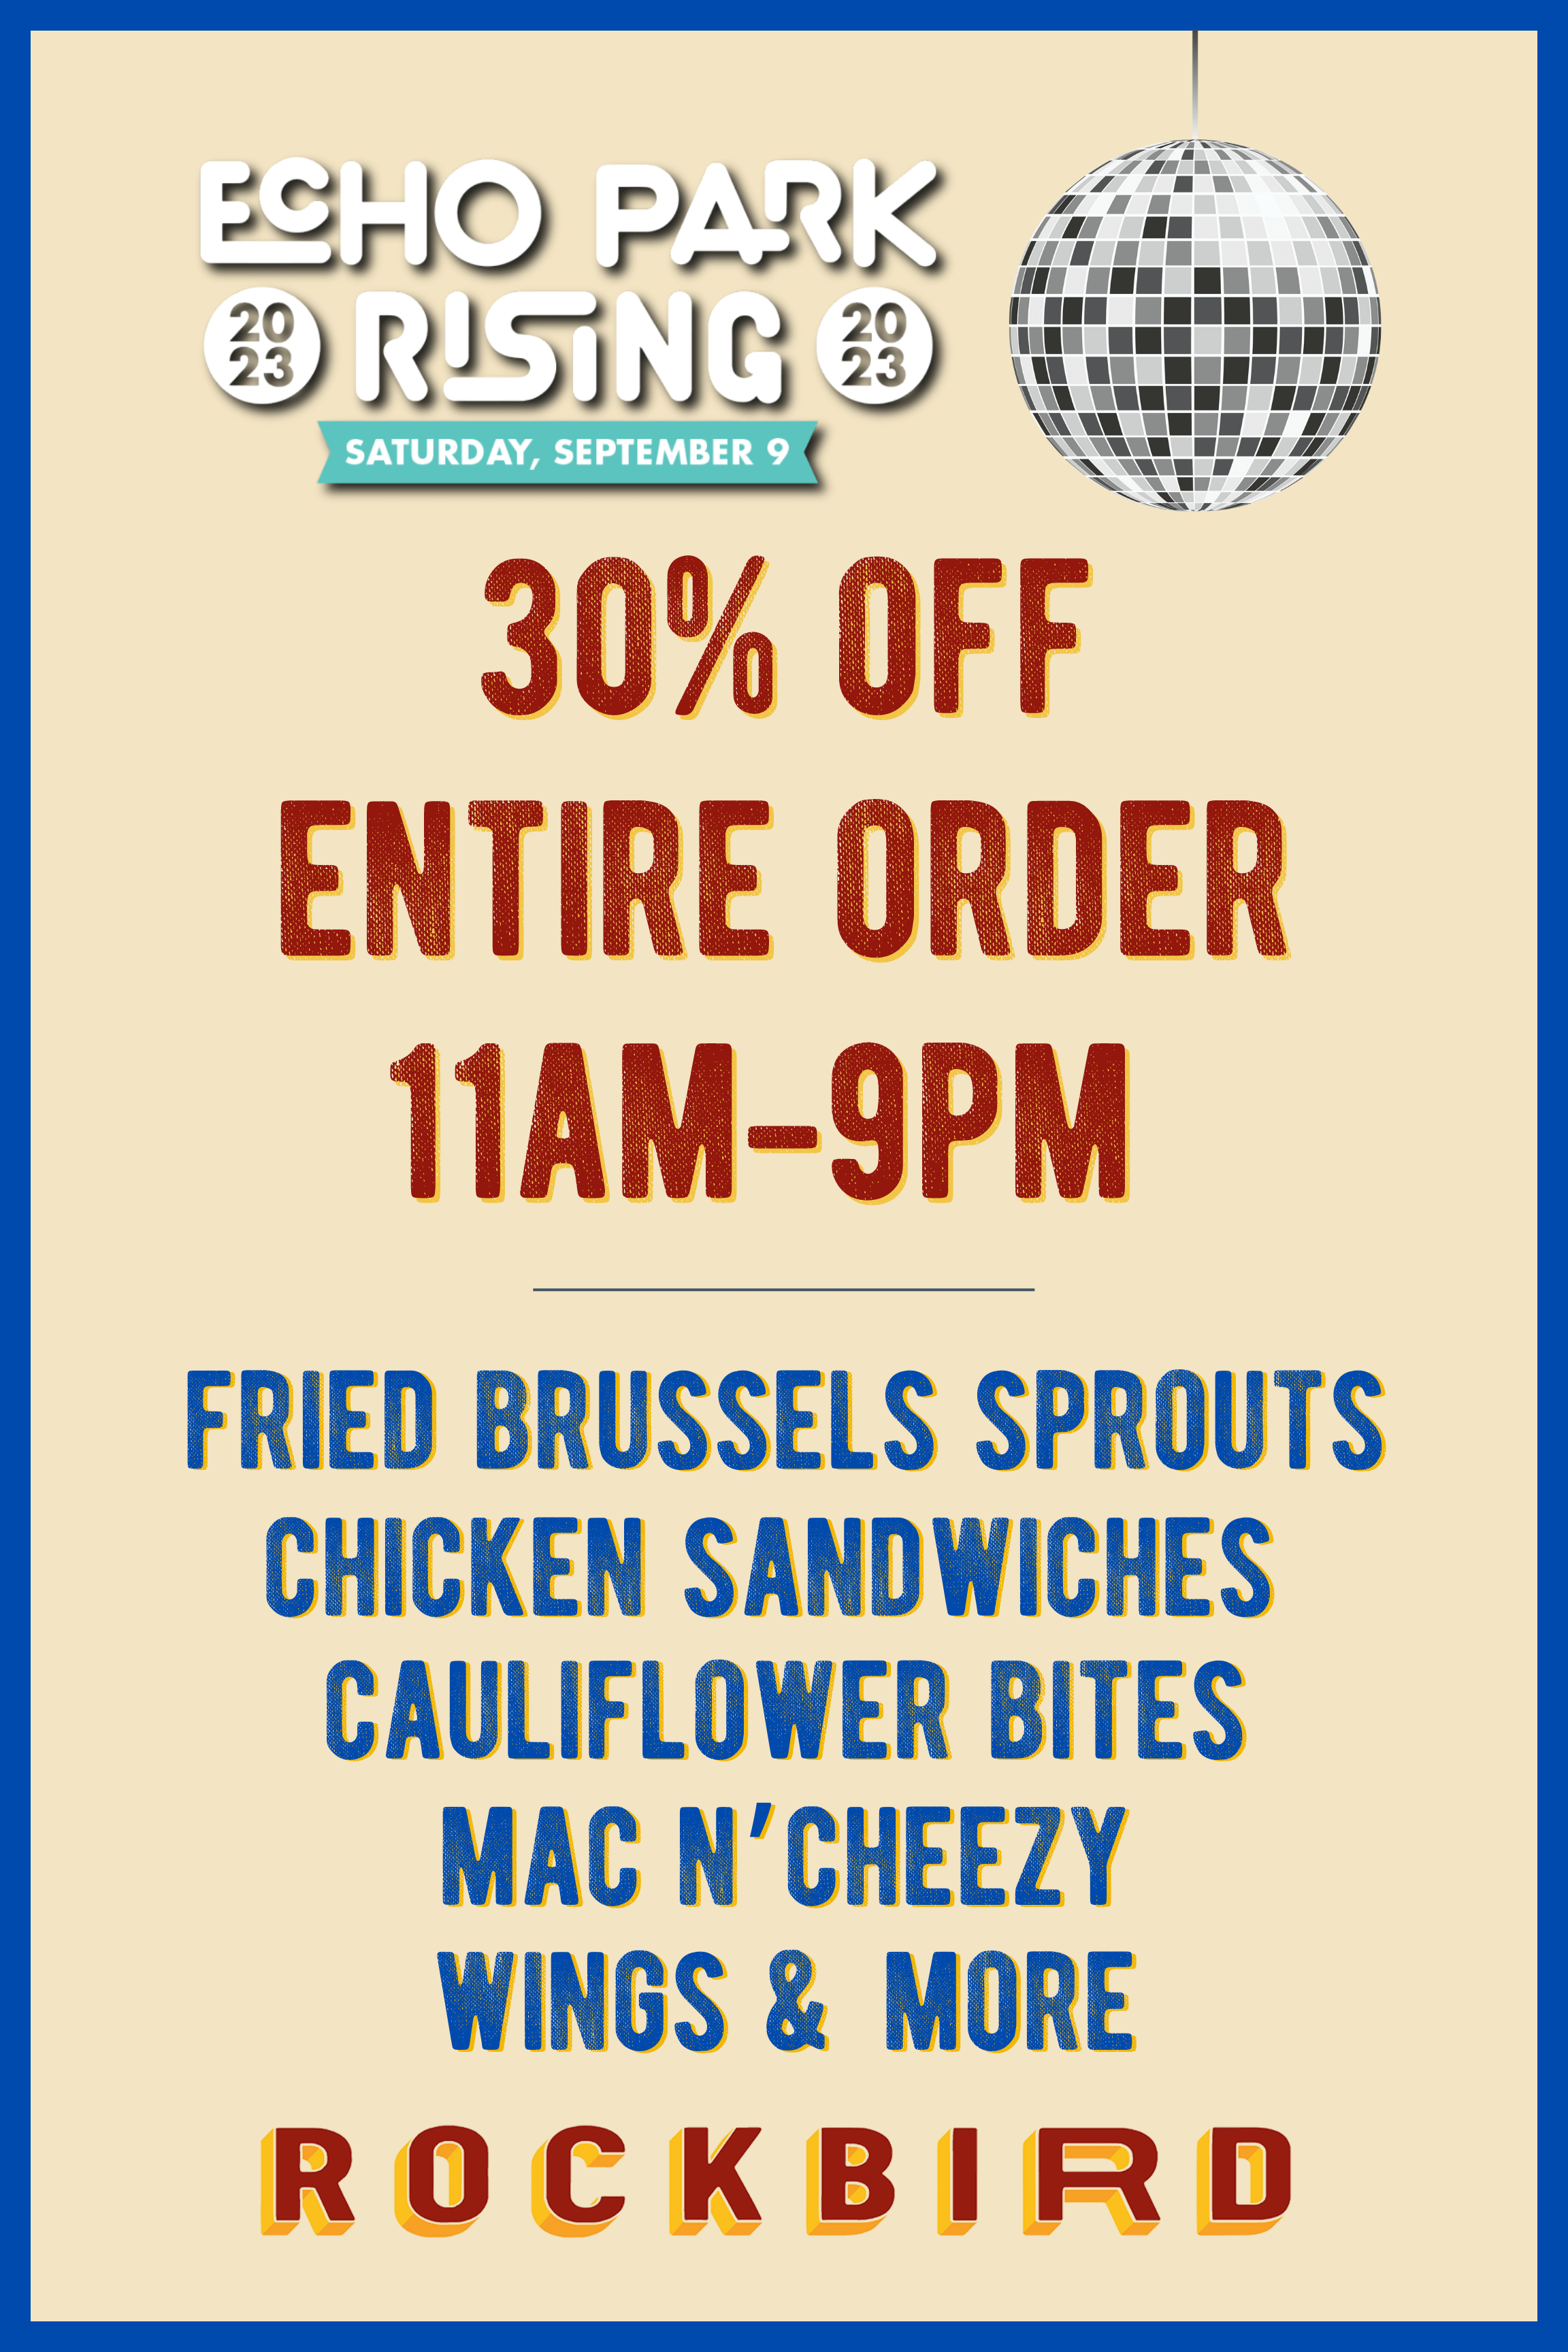 30% off Entire Order from 11am-9pm